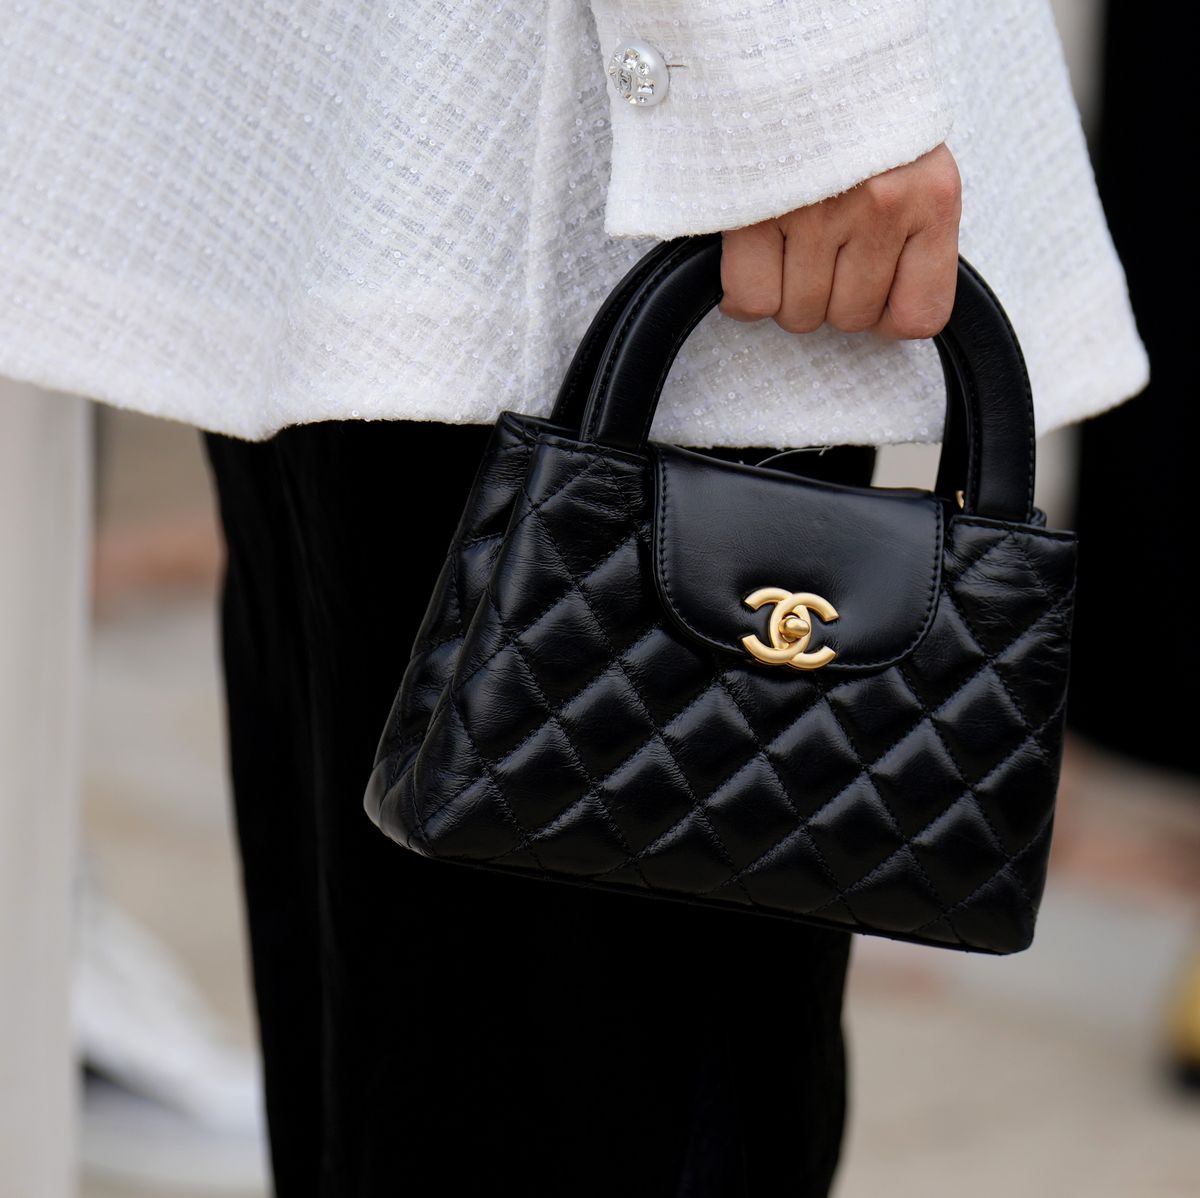 Chanel  Buy or Sell your designer clothing online! - Vestiaire